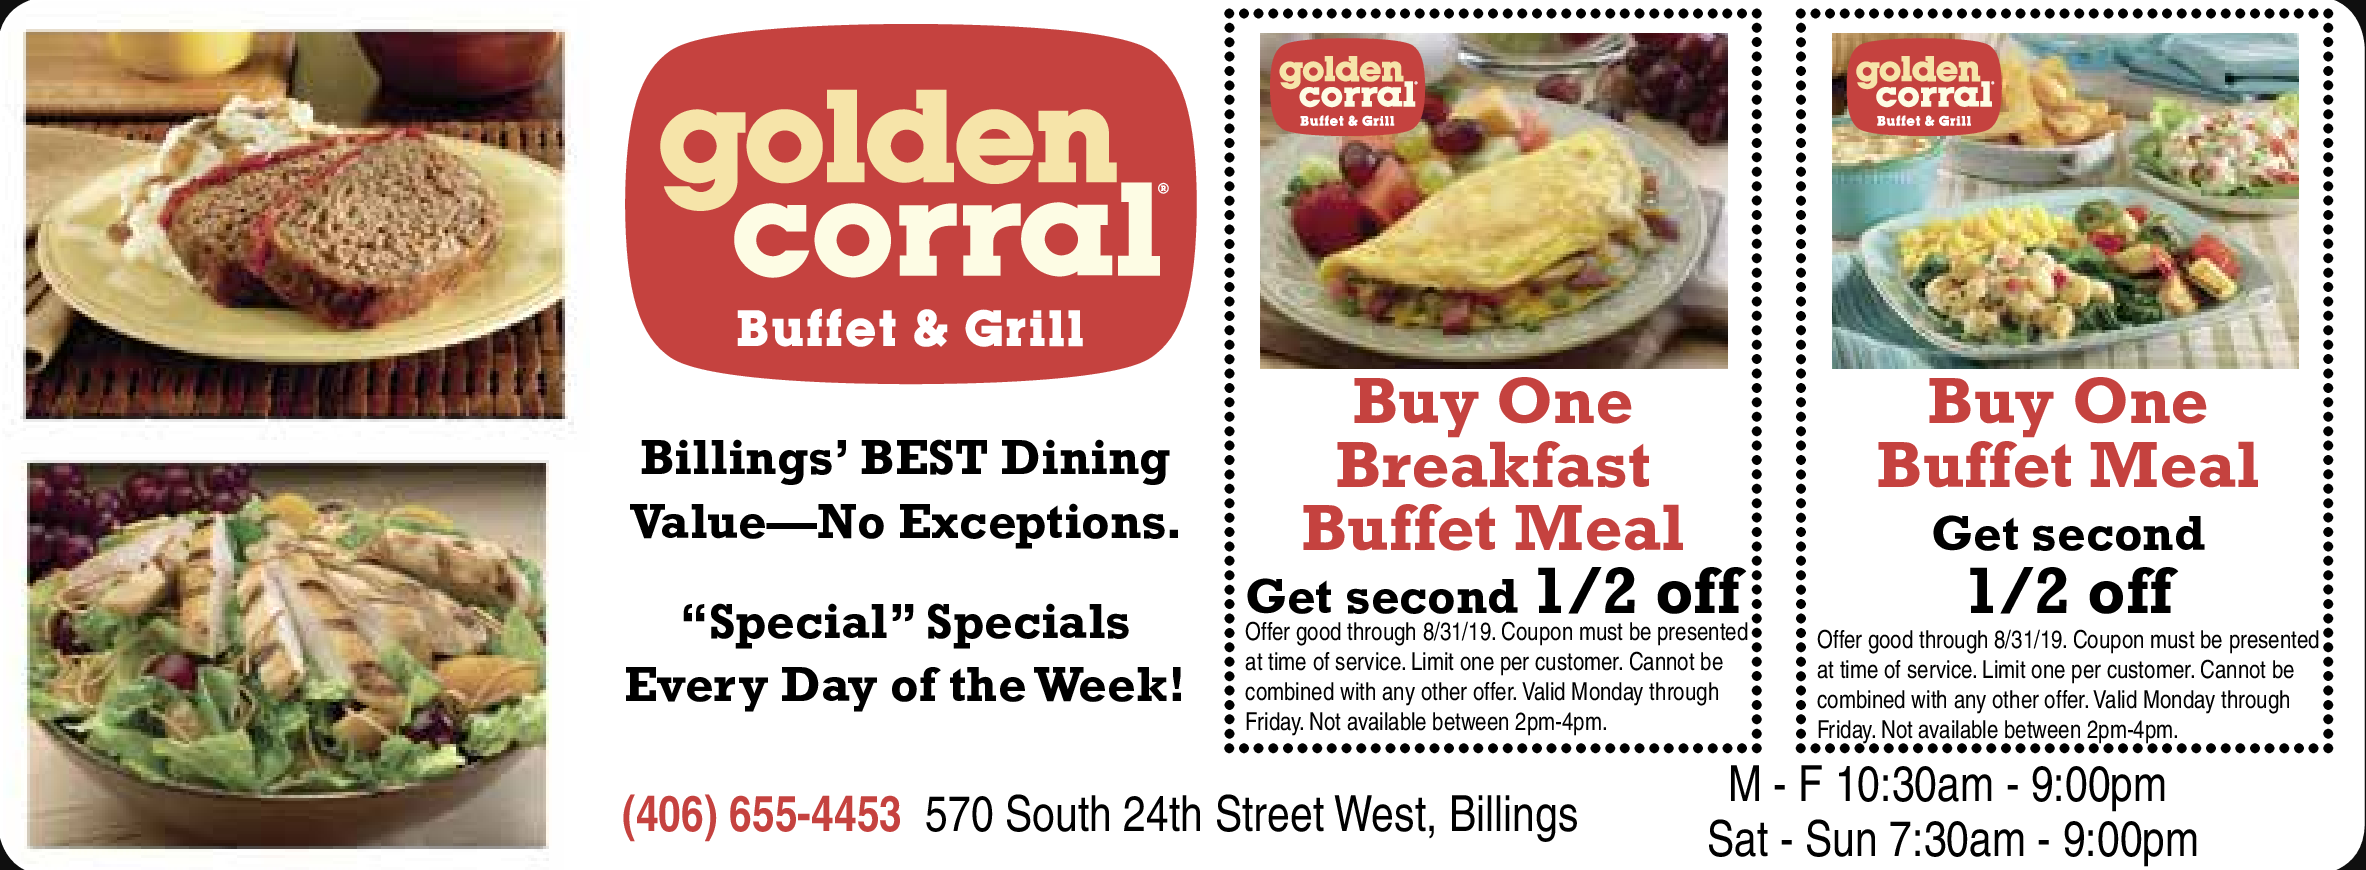 Golden Corral Coupons Buy One Get One Free Printable